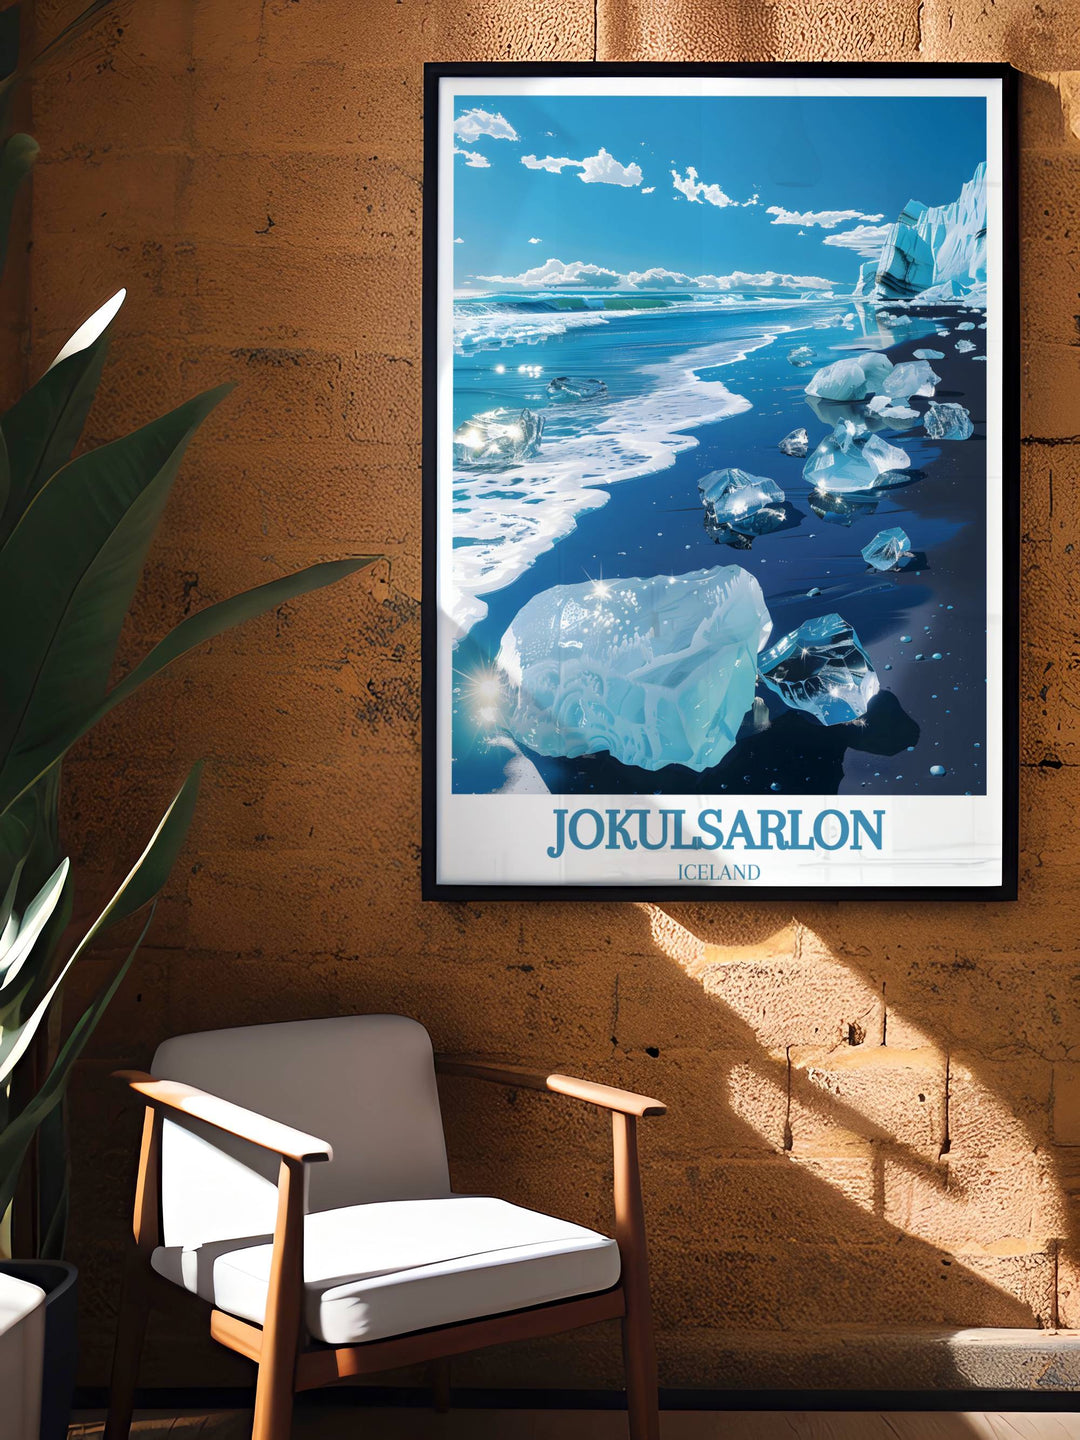 Transform your space with the beauty of Icelandic landscapes, captured in this printable photo of Diamond Beach jokulsarlon, a true testament to nature's splendor